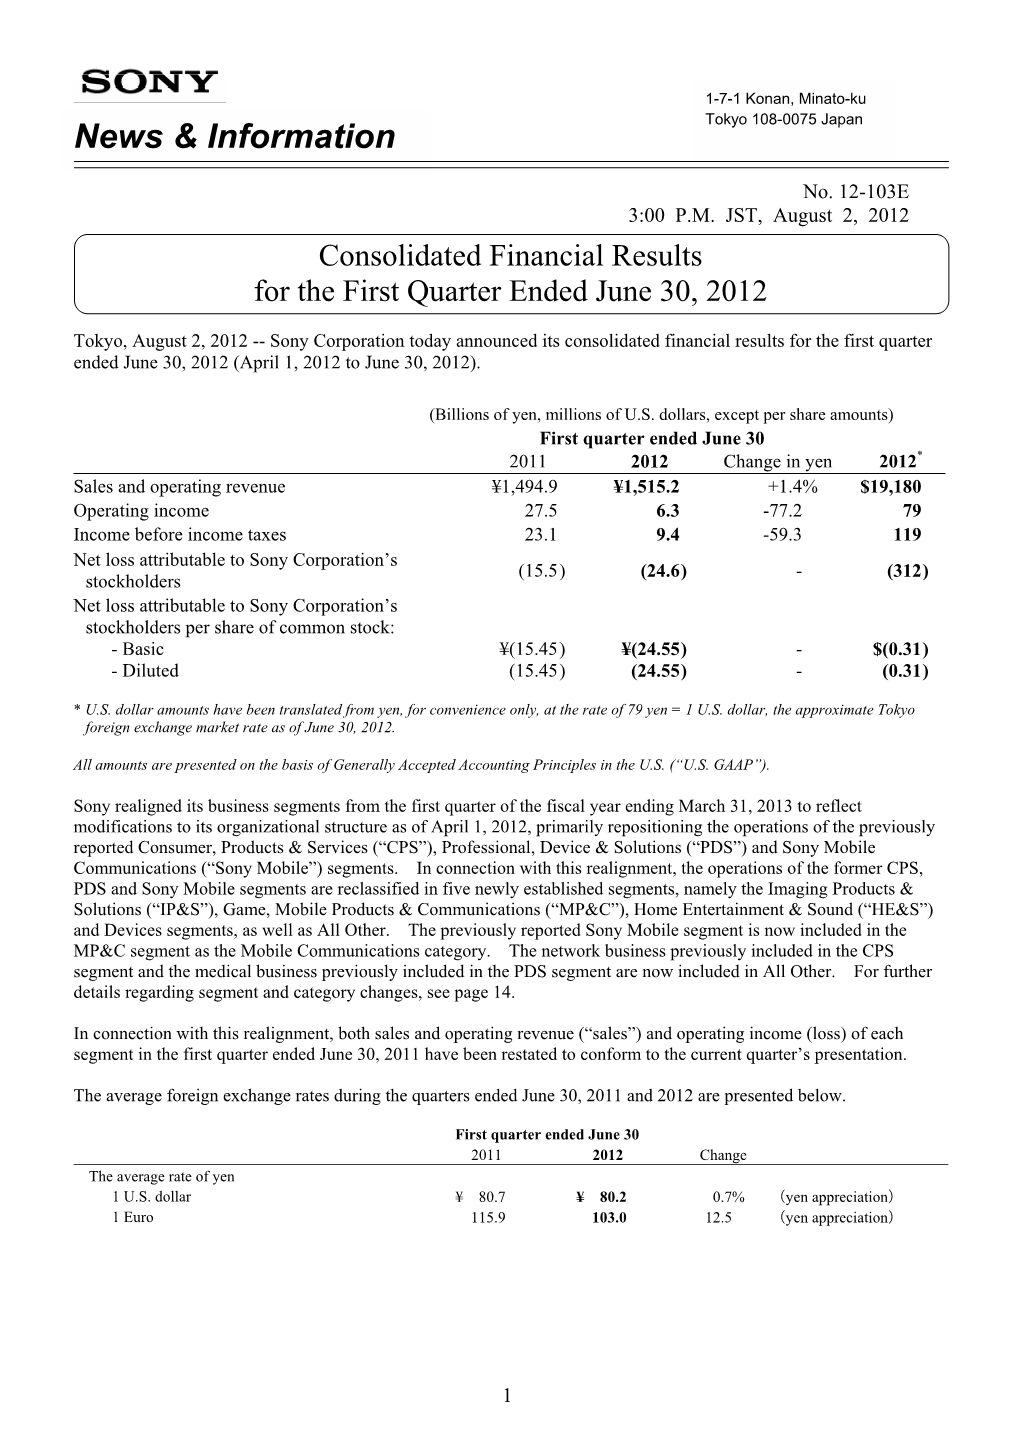 Consolidated Financial Results for the First Quarter Ended June 30, 2012